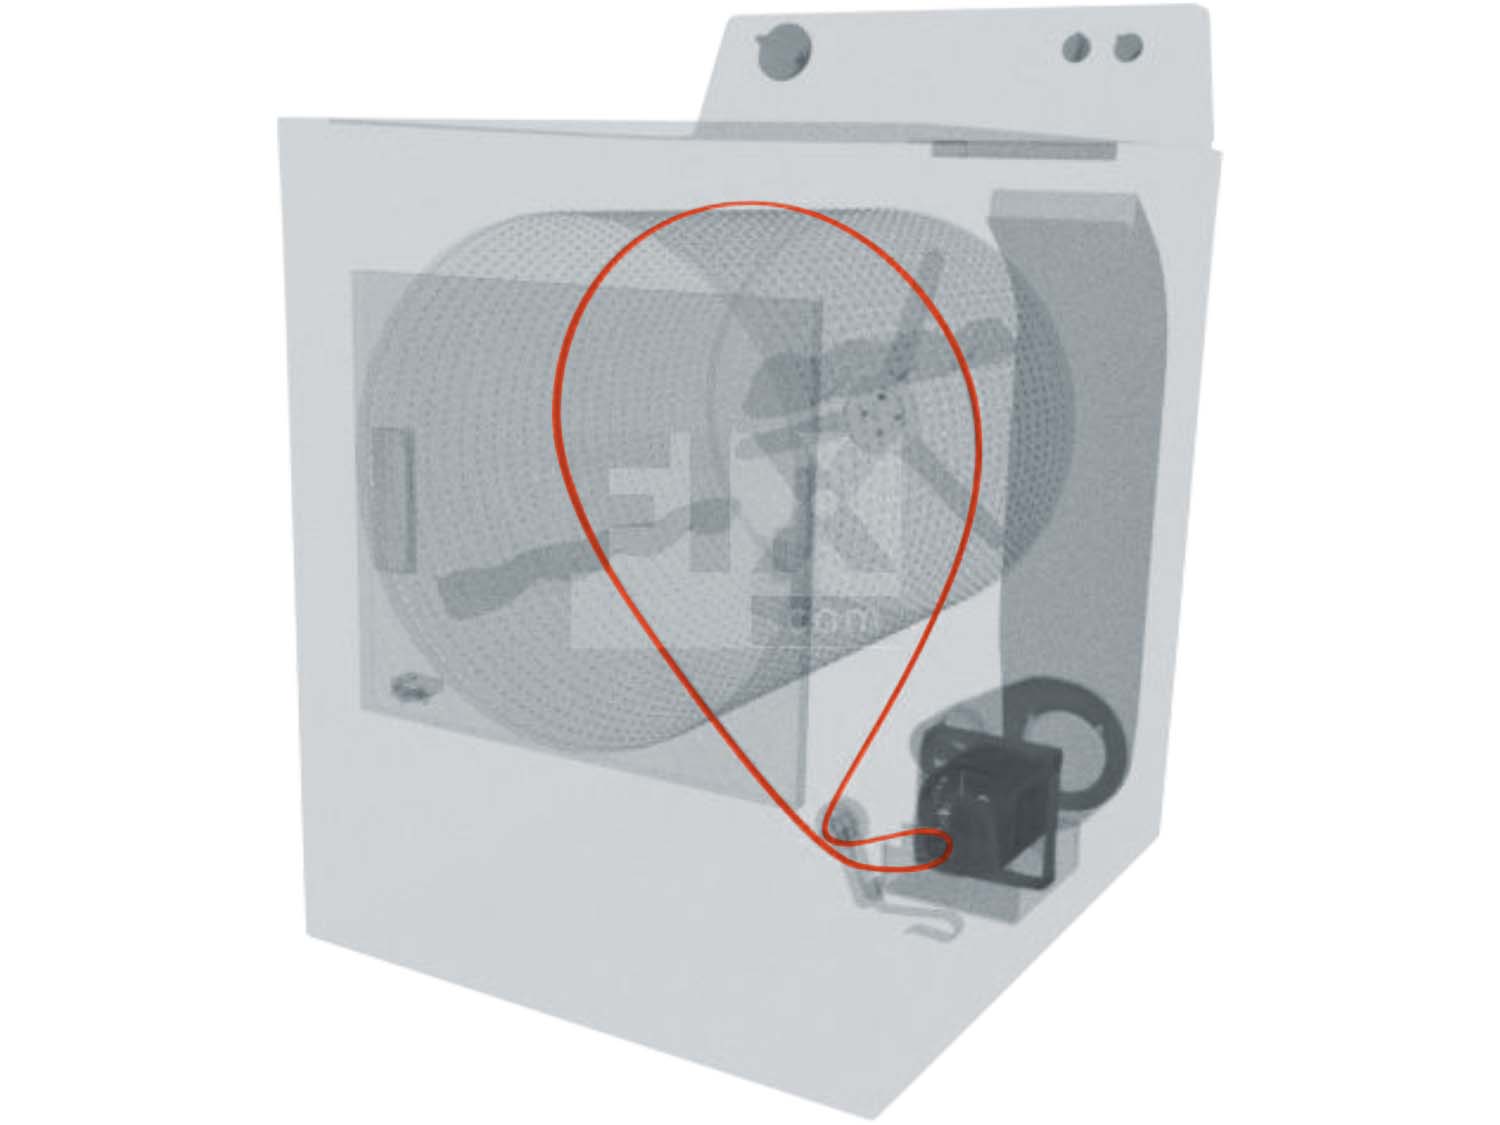 A 3D diagram showing the components of a dryer and specifying the location of the belt